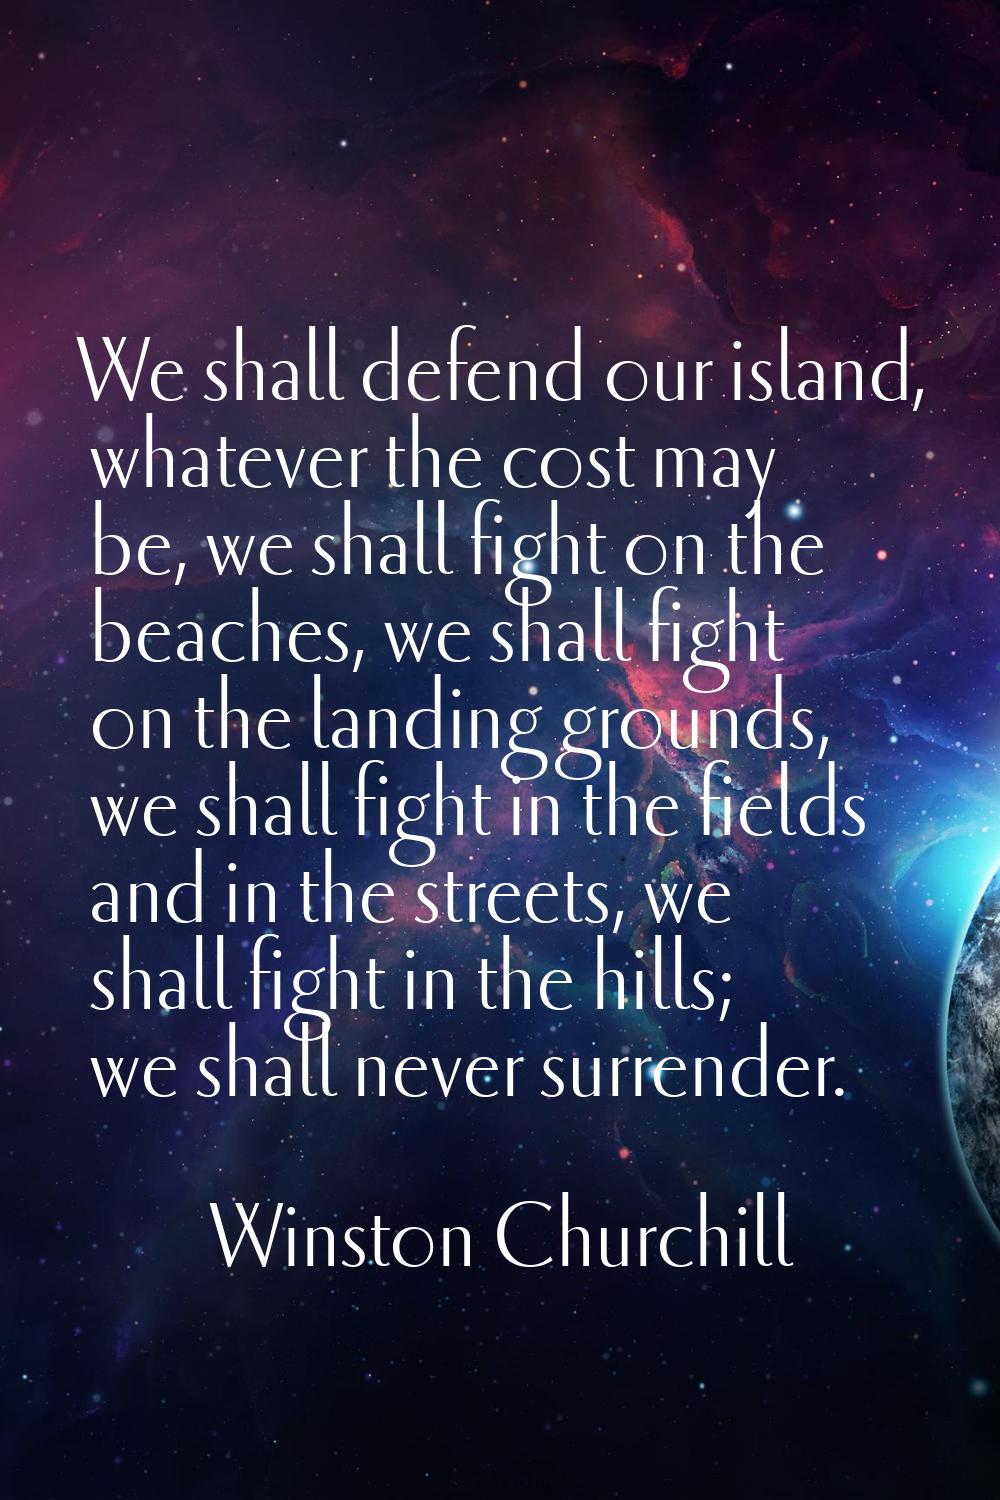 We shall defend our island, whatever the cost may be, we shall fight on the beaches, we shall fight